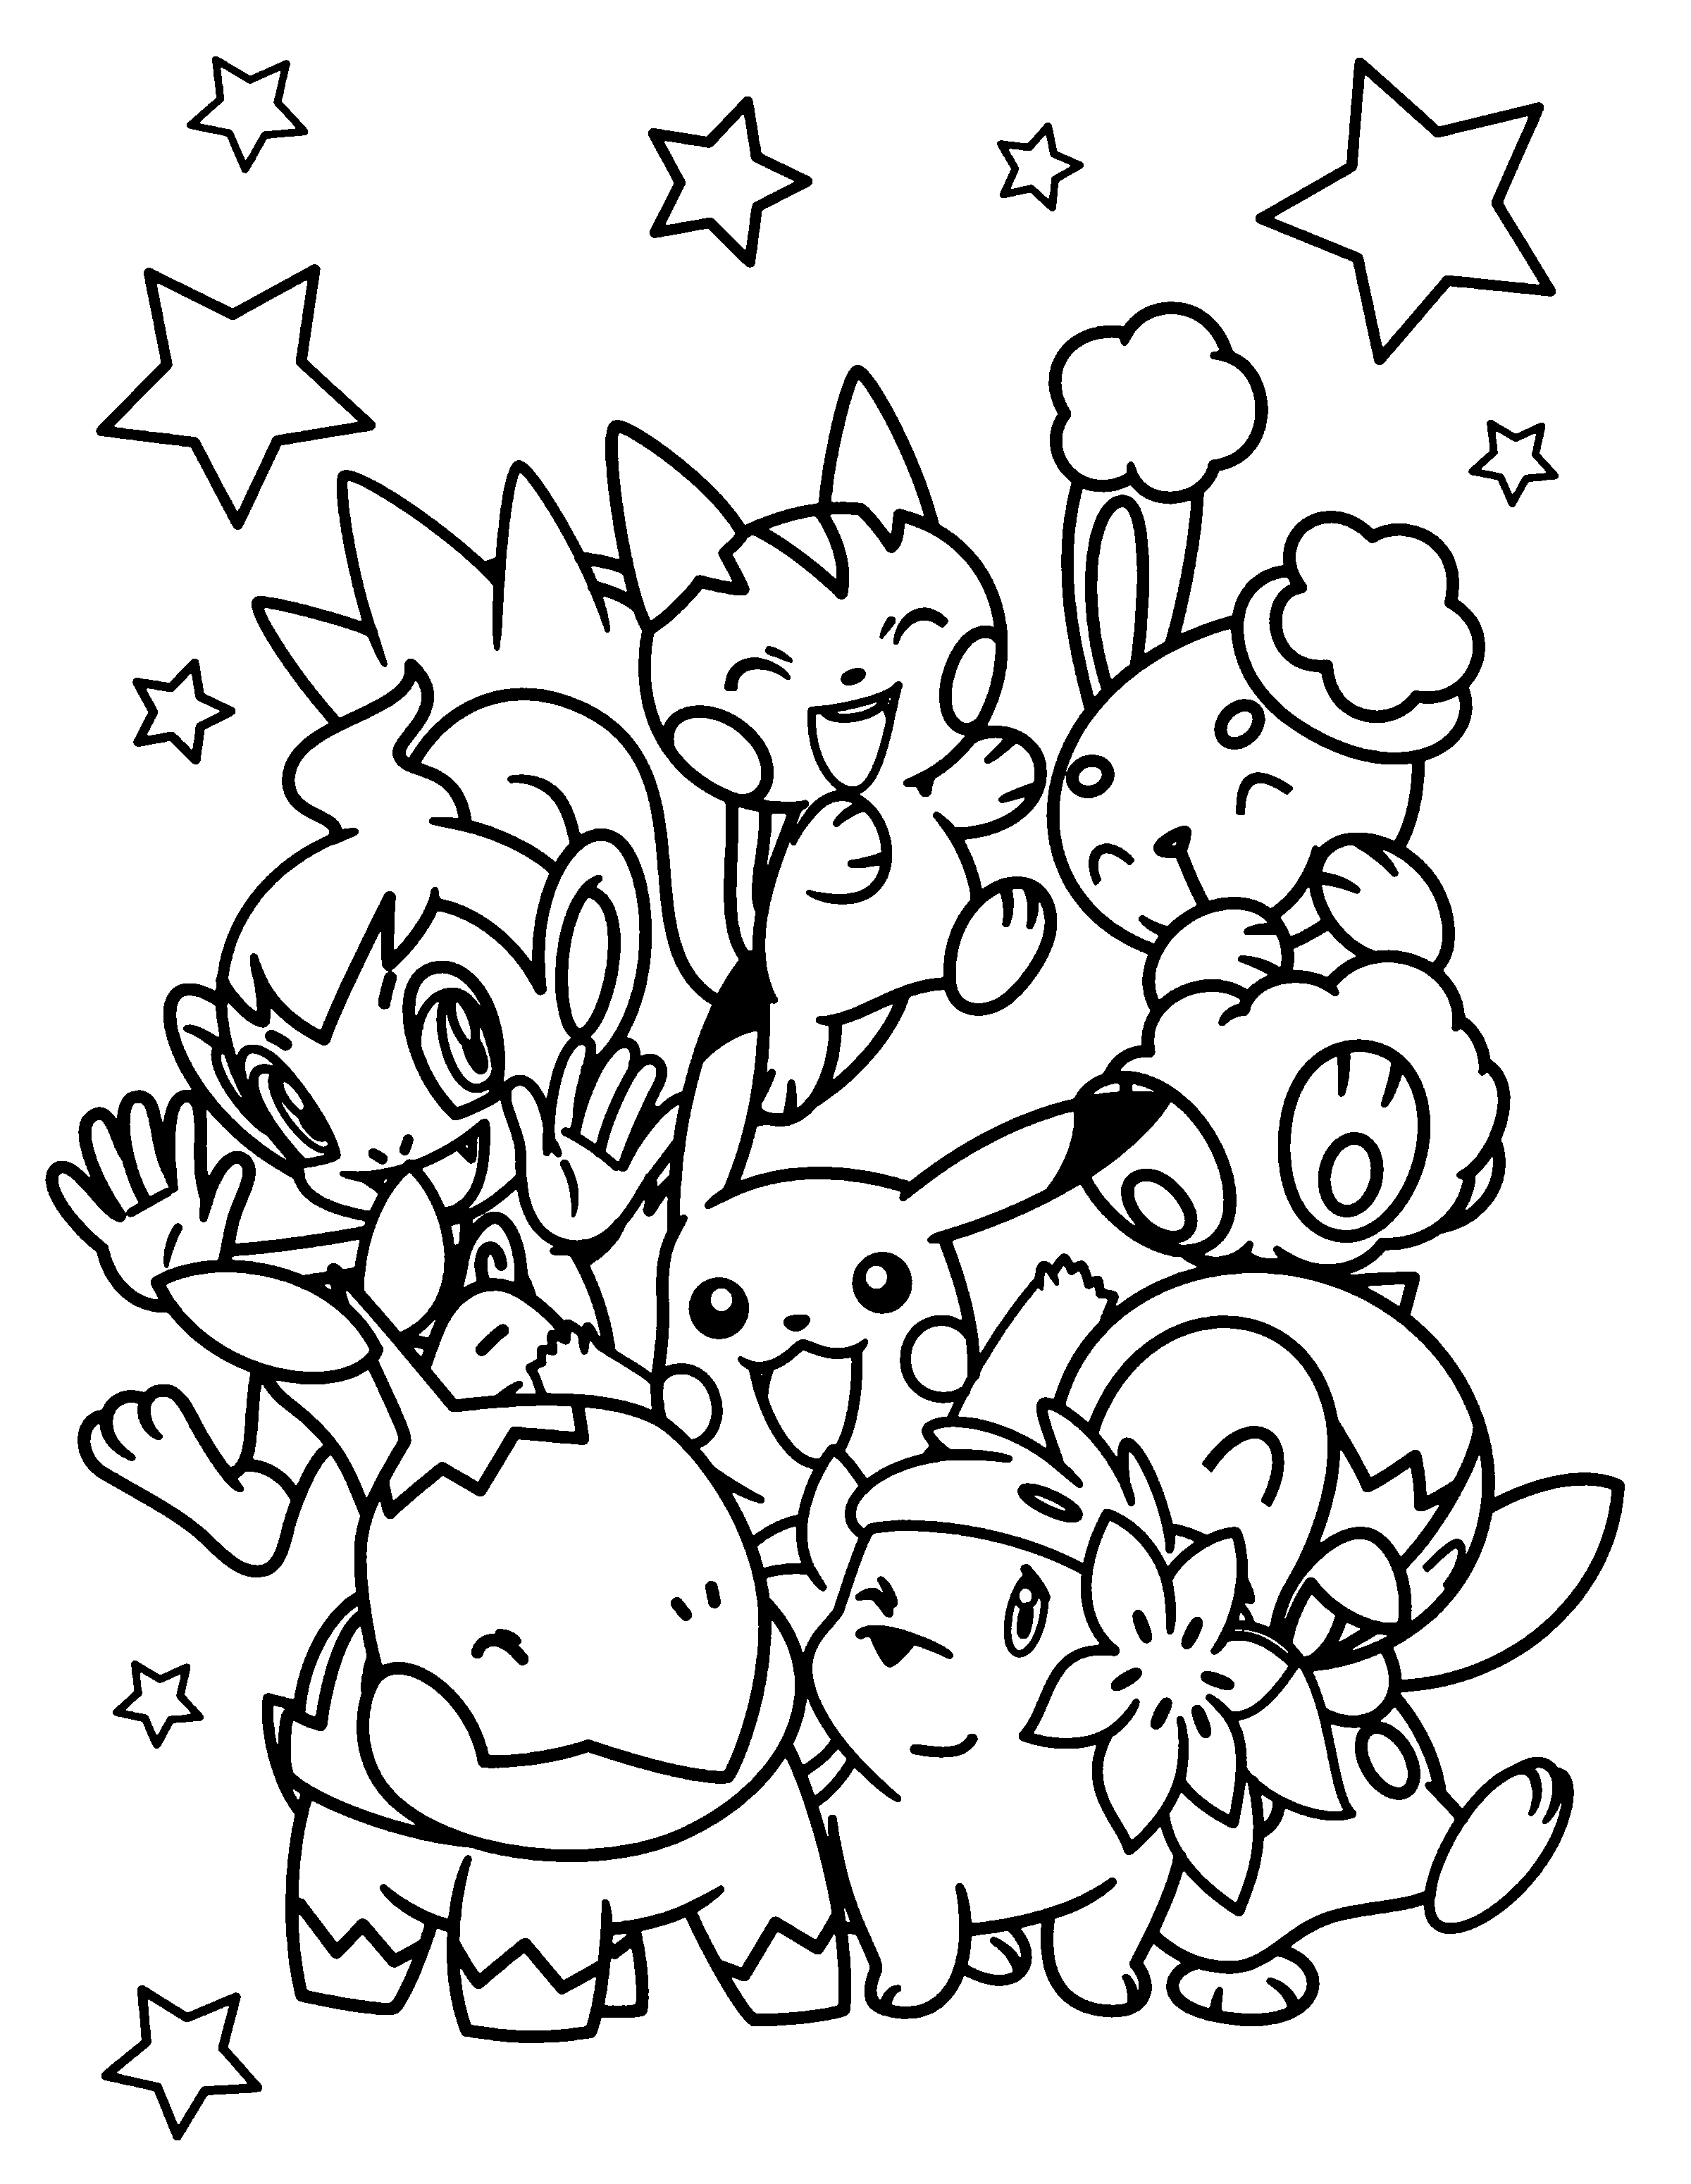 Pokemon free to color for kids - All Pokemon coloring pages Kids Coloring  Pages